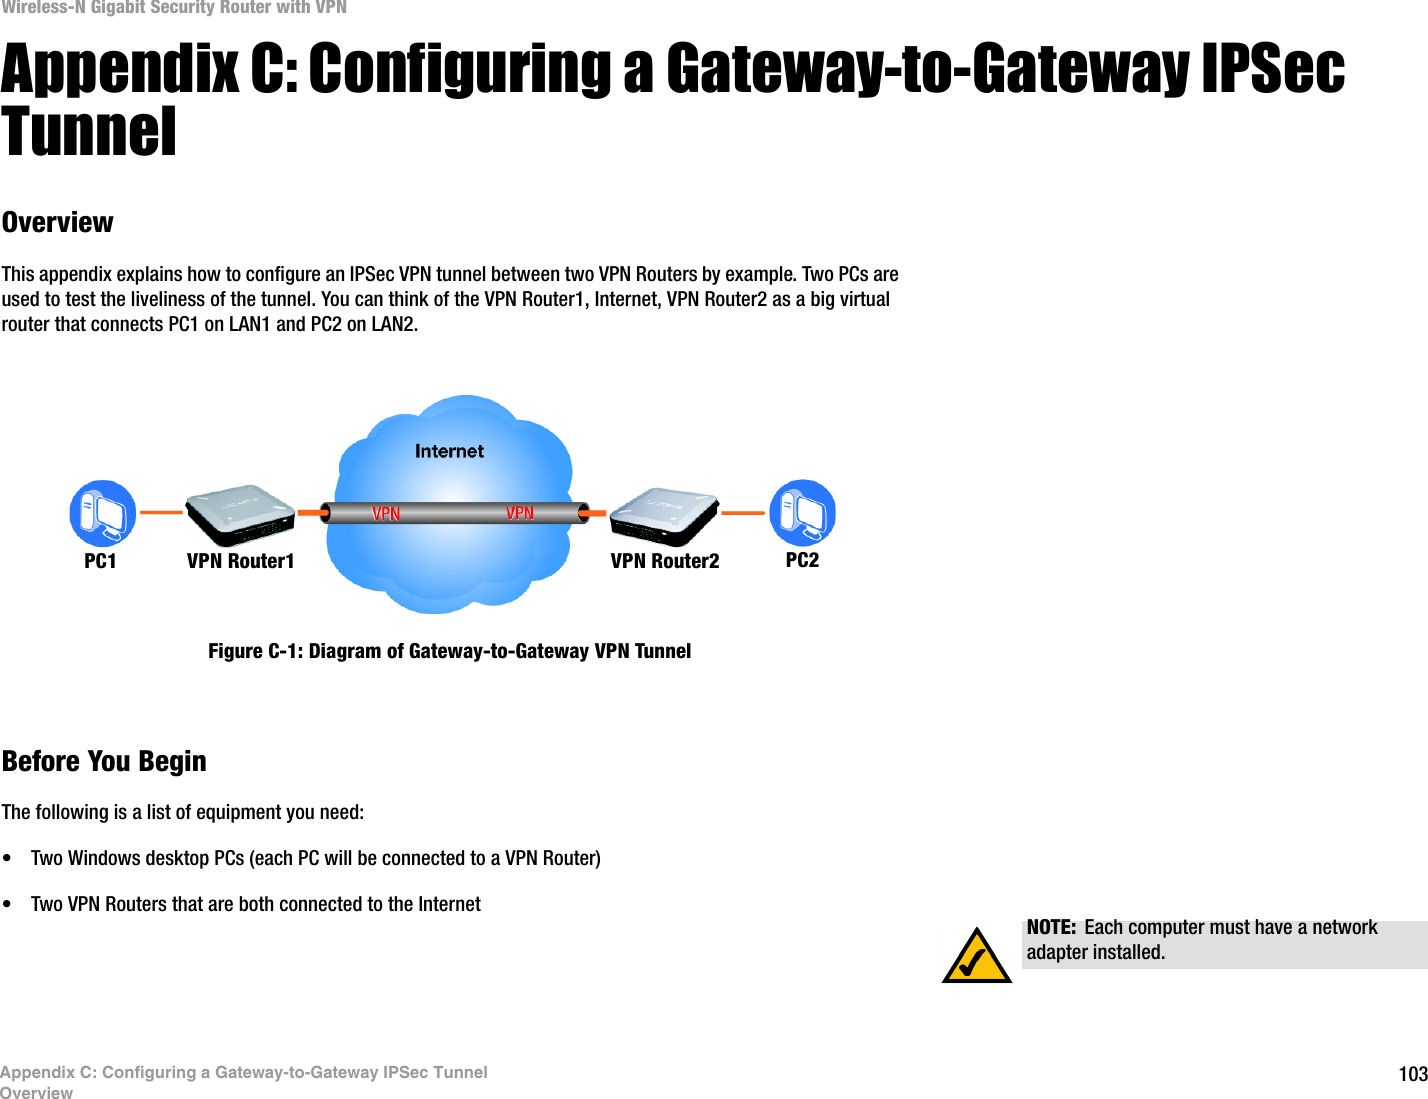 103Wireless-N Gigabit Security Router with VPNAppendix C: Configuring a Gateway-to-Gateway IPSec TunnelOverviewAppendix C: Configuring a Gateway-to-Gateway IPSec TunnelOverviewThis appendix explains how to configure an IPSec VPN tunnel between two VPN Routers by example. Two PCs are used to test the liveliness of the tunnel. You can think of the VPN Router1, Internet, VPN Router2 as a big virtual router that connects PC1 on LAN1 and PC2 on LAN2.Before You BeginThe following is a list of equipment you need:• Two Windows desktop PCs (each PC will be connected to a VPN Router)• Two VPN Routers that are both connected to the InternetPC1 VPN Router1 VPN Router2 PC2NOTE: Each computer must have a network adapter installed.Figure C-1: Diagram of Gateway-to-Gateway VPN Tunnel